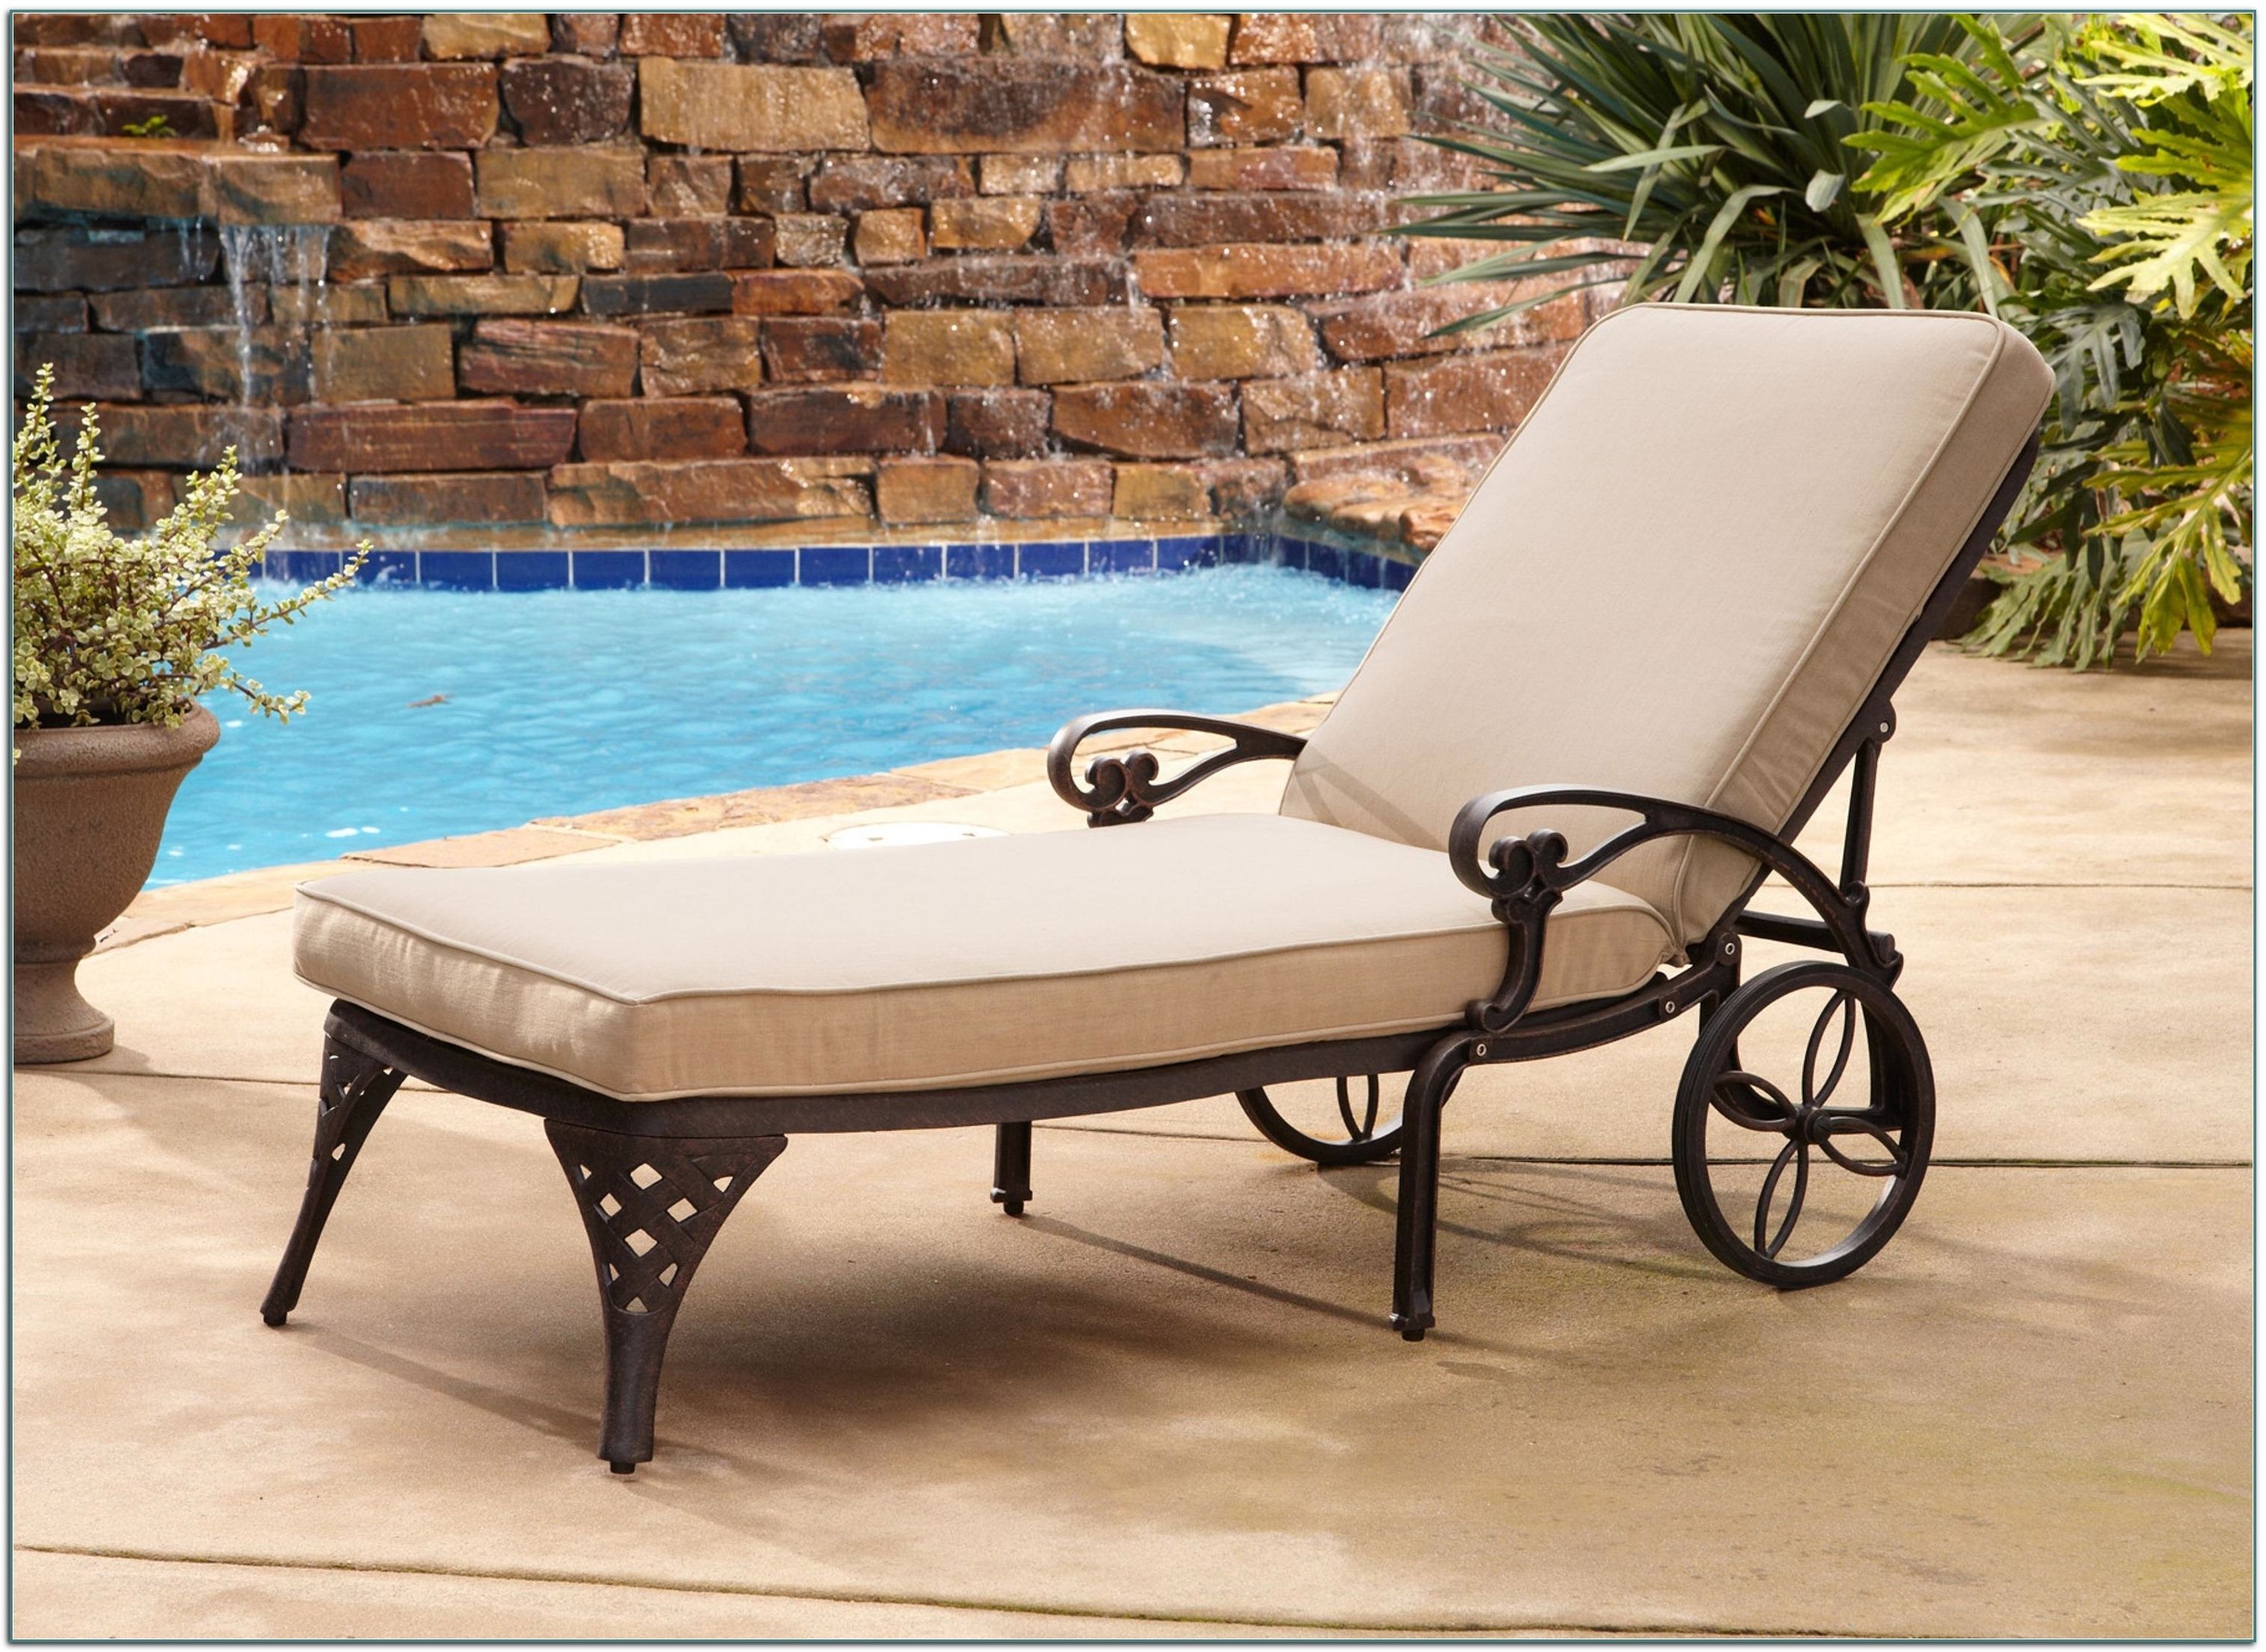 Aluminum Lounge Chairs Pool • Lounge Chairs Ideas Intended For Most Recent Chaise Lounge Chairs For Poolside (View 1 of 15)